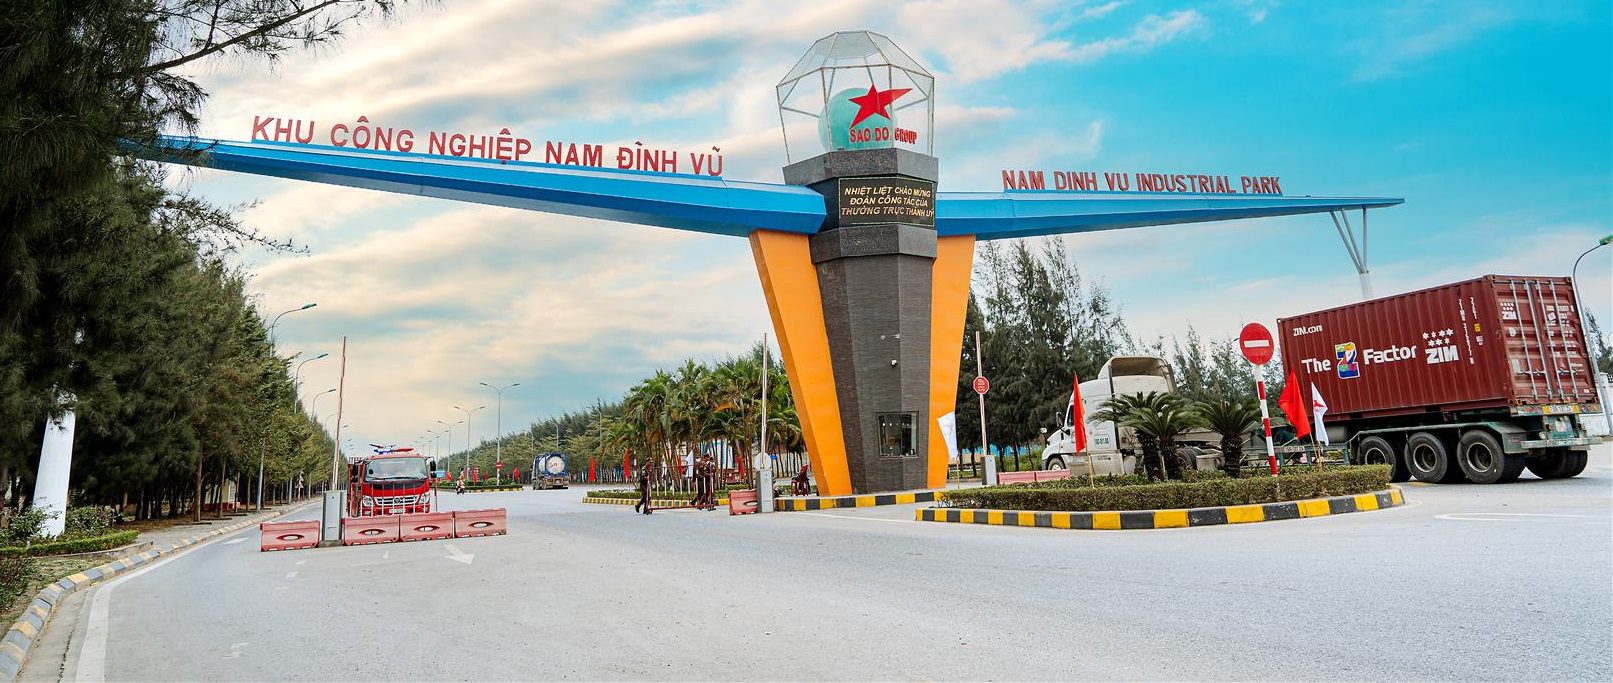 Nam Dinh Vu industrial Park, one of the outstanding industrial parks in Hai Phong